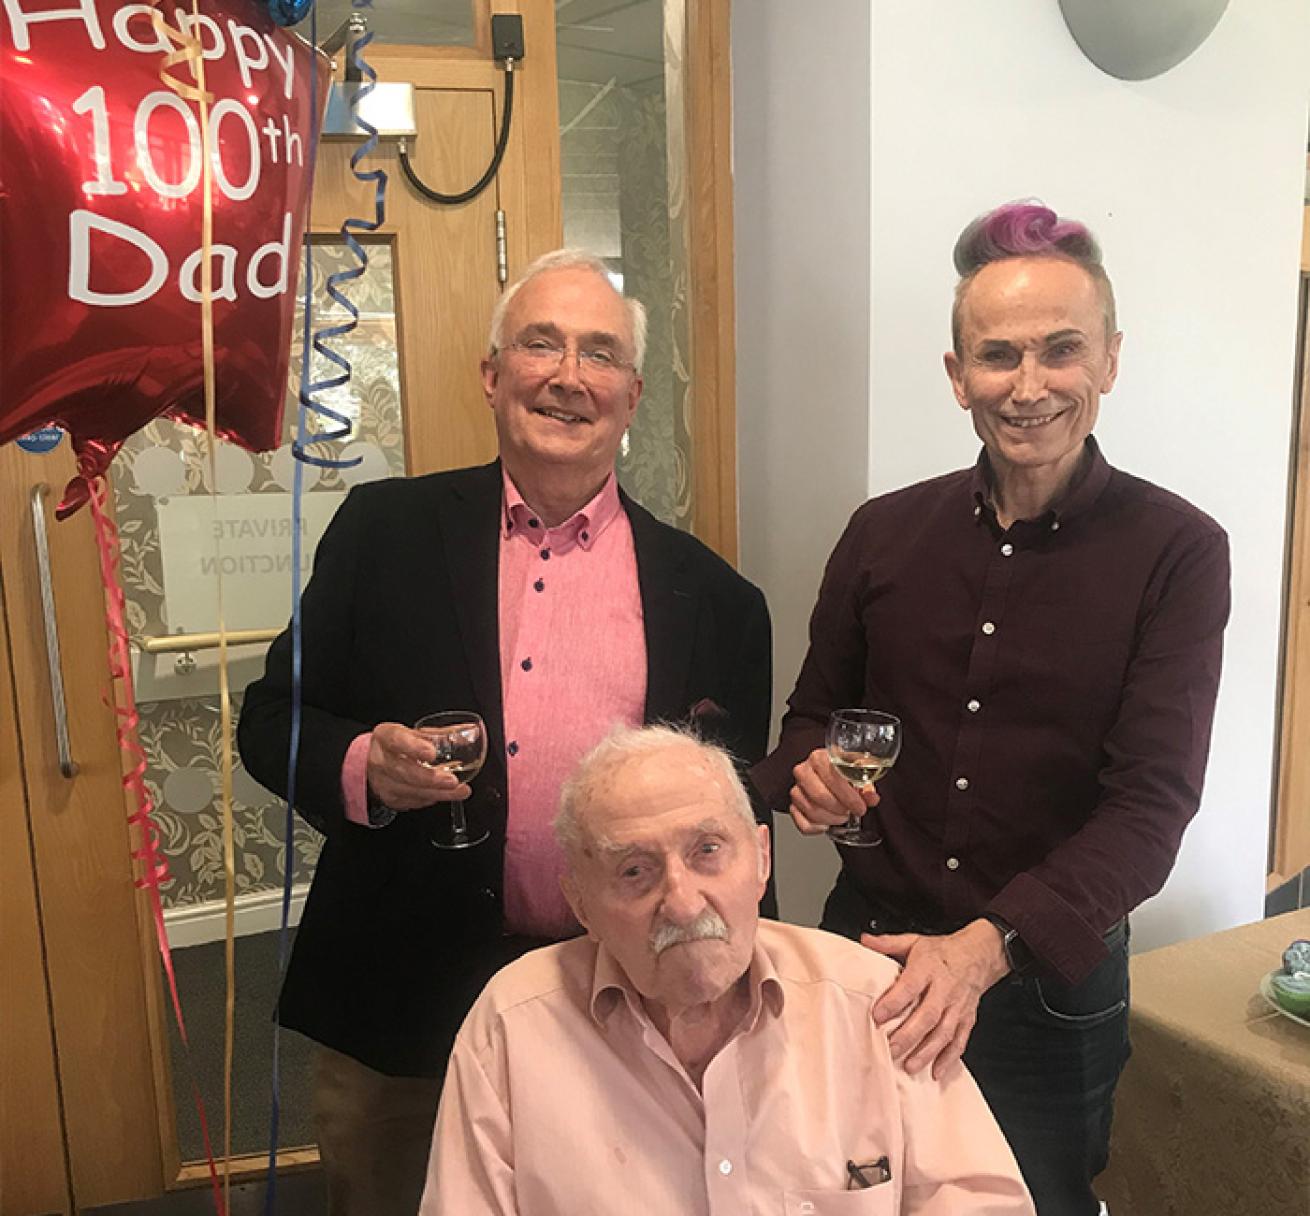 Three smartly dressed gentlemen pose for a photograph next to a red, star-shaped balloon that reads "Happy 100th Dad." The gentleman at the front is sitting in a wheelchair. He is elderly and wears a pastel pink shirt. The gentleman on the left behind him wears a salmon pink shirt and glasses and the gentleman on the right wears a purple mauve shirt, with a streak of purple in his hair to match. They both smile broadly with wine glasses in their hands.